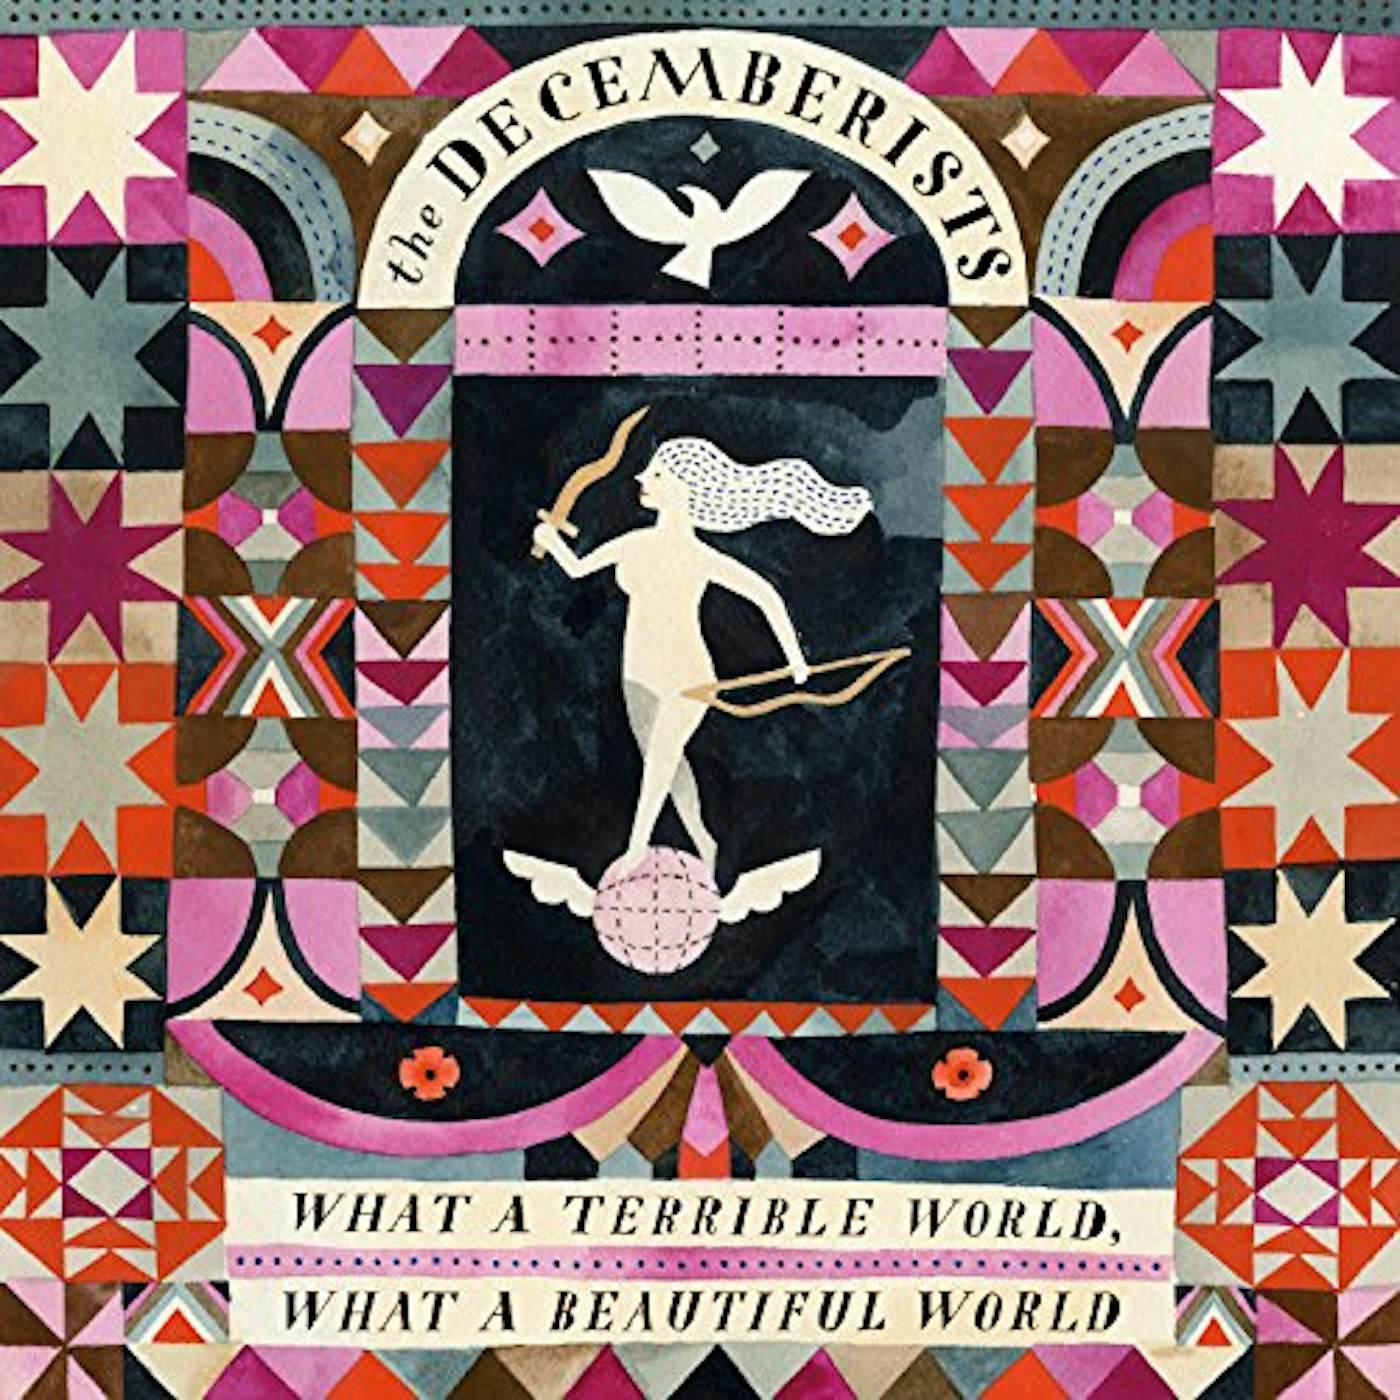 The Decemberists WHAT A TERRIBLE WORLD: WHAT A BEAUTIFUL WORLD Vinyl Record